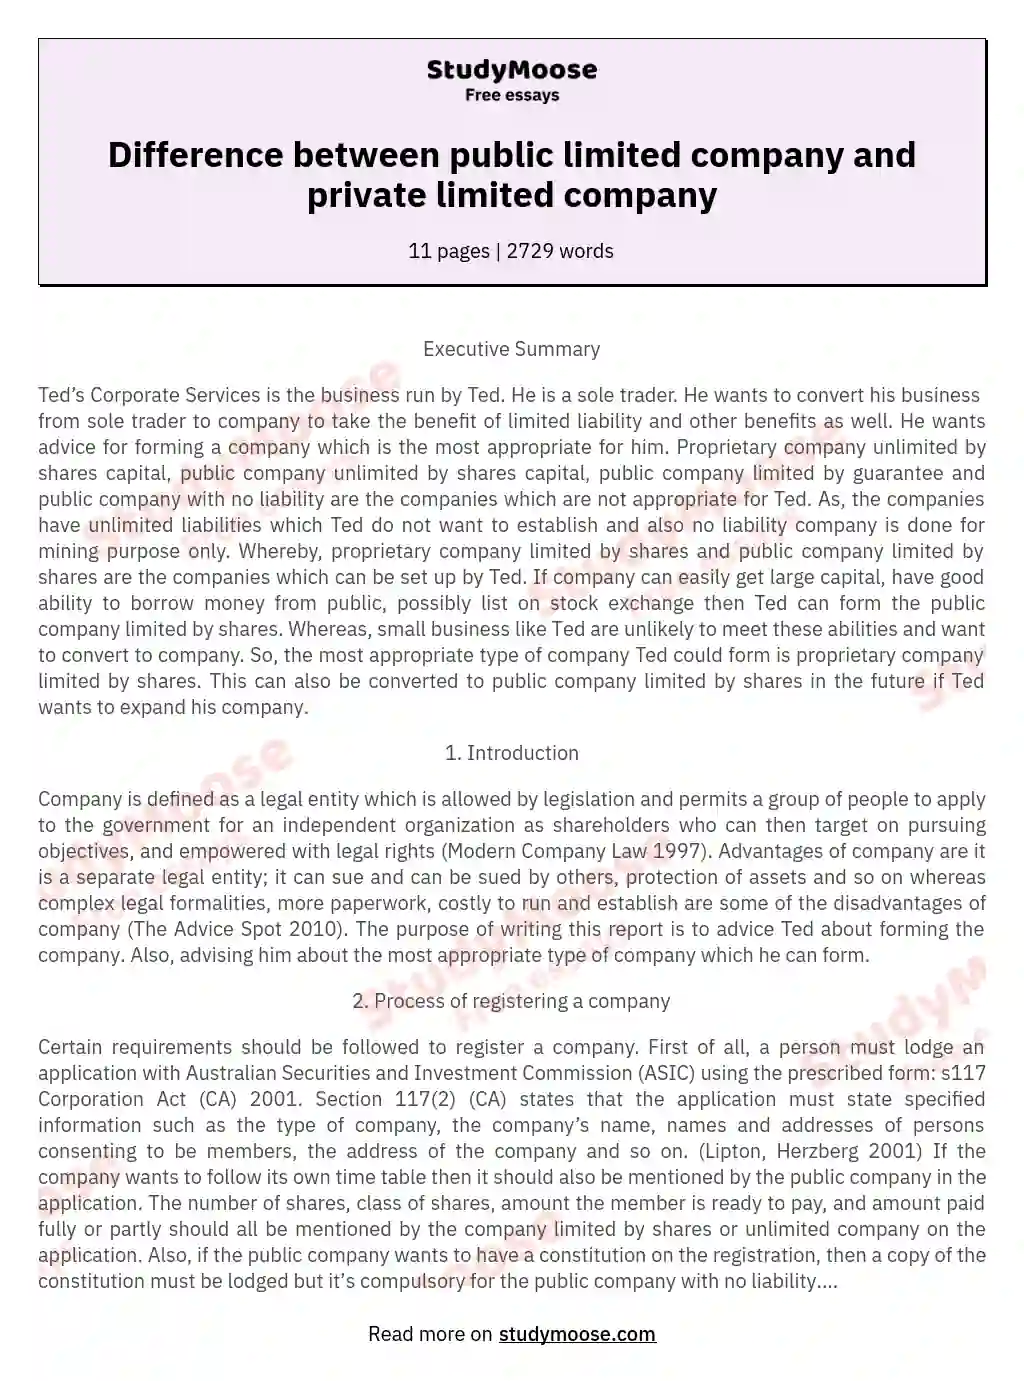 Difference between public limited company and private limited company essay